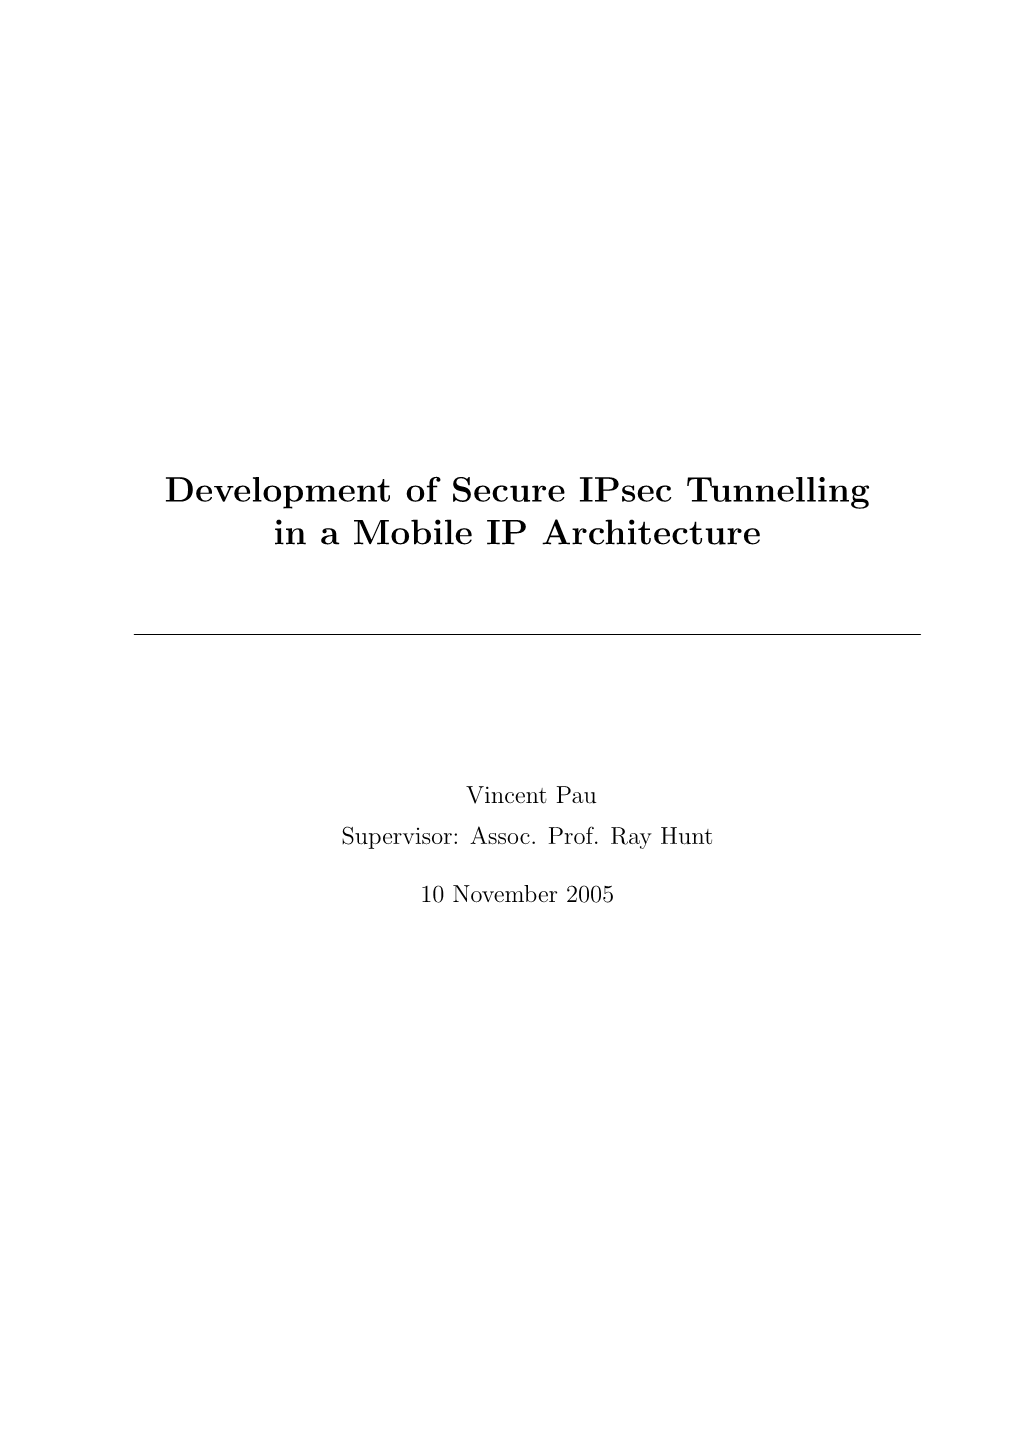 Development of Secure Ipsec Tunnelling in a Mobile IP Architecture